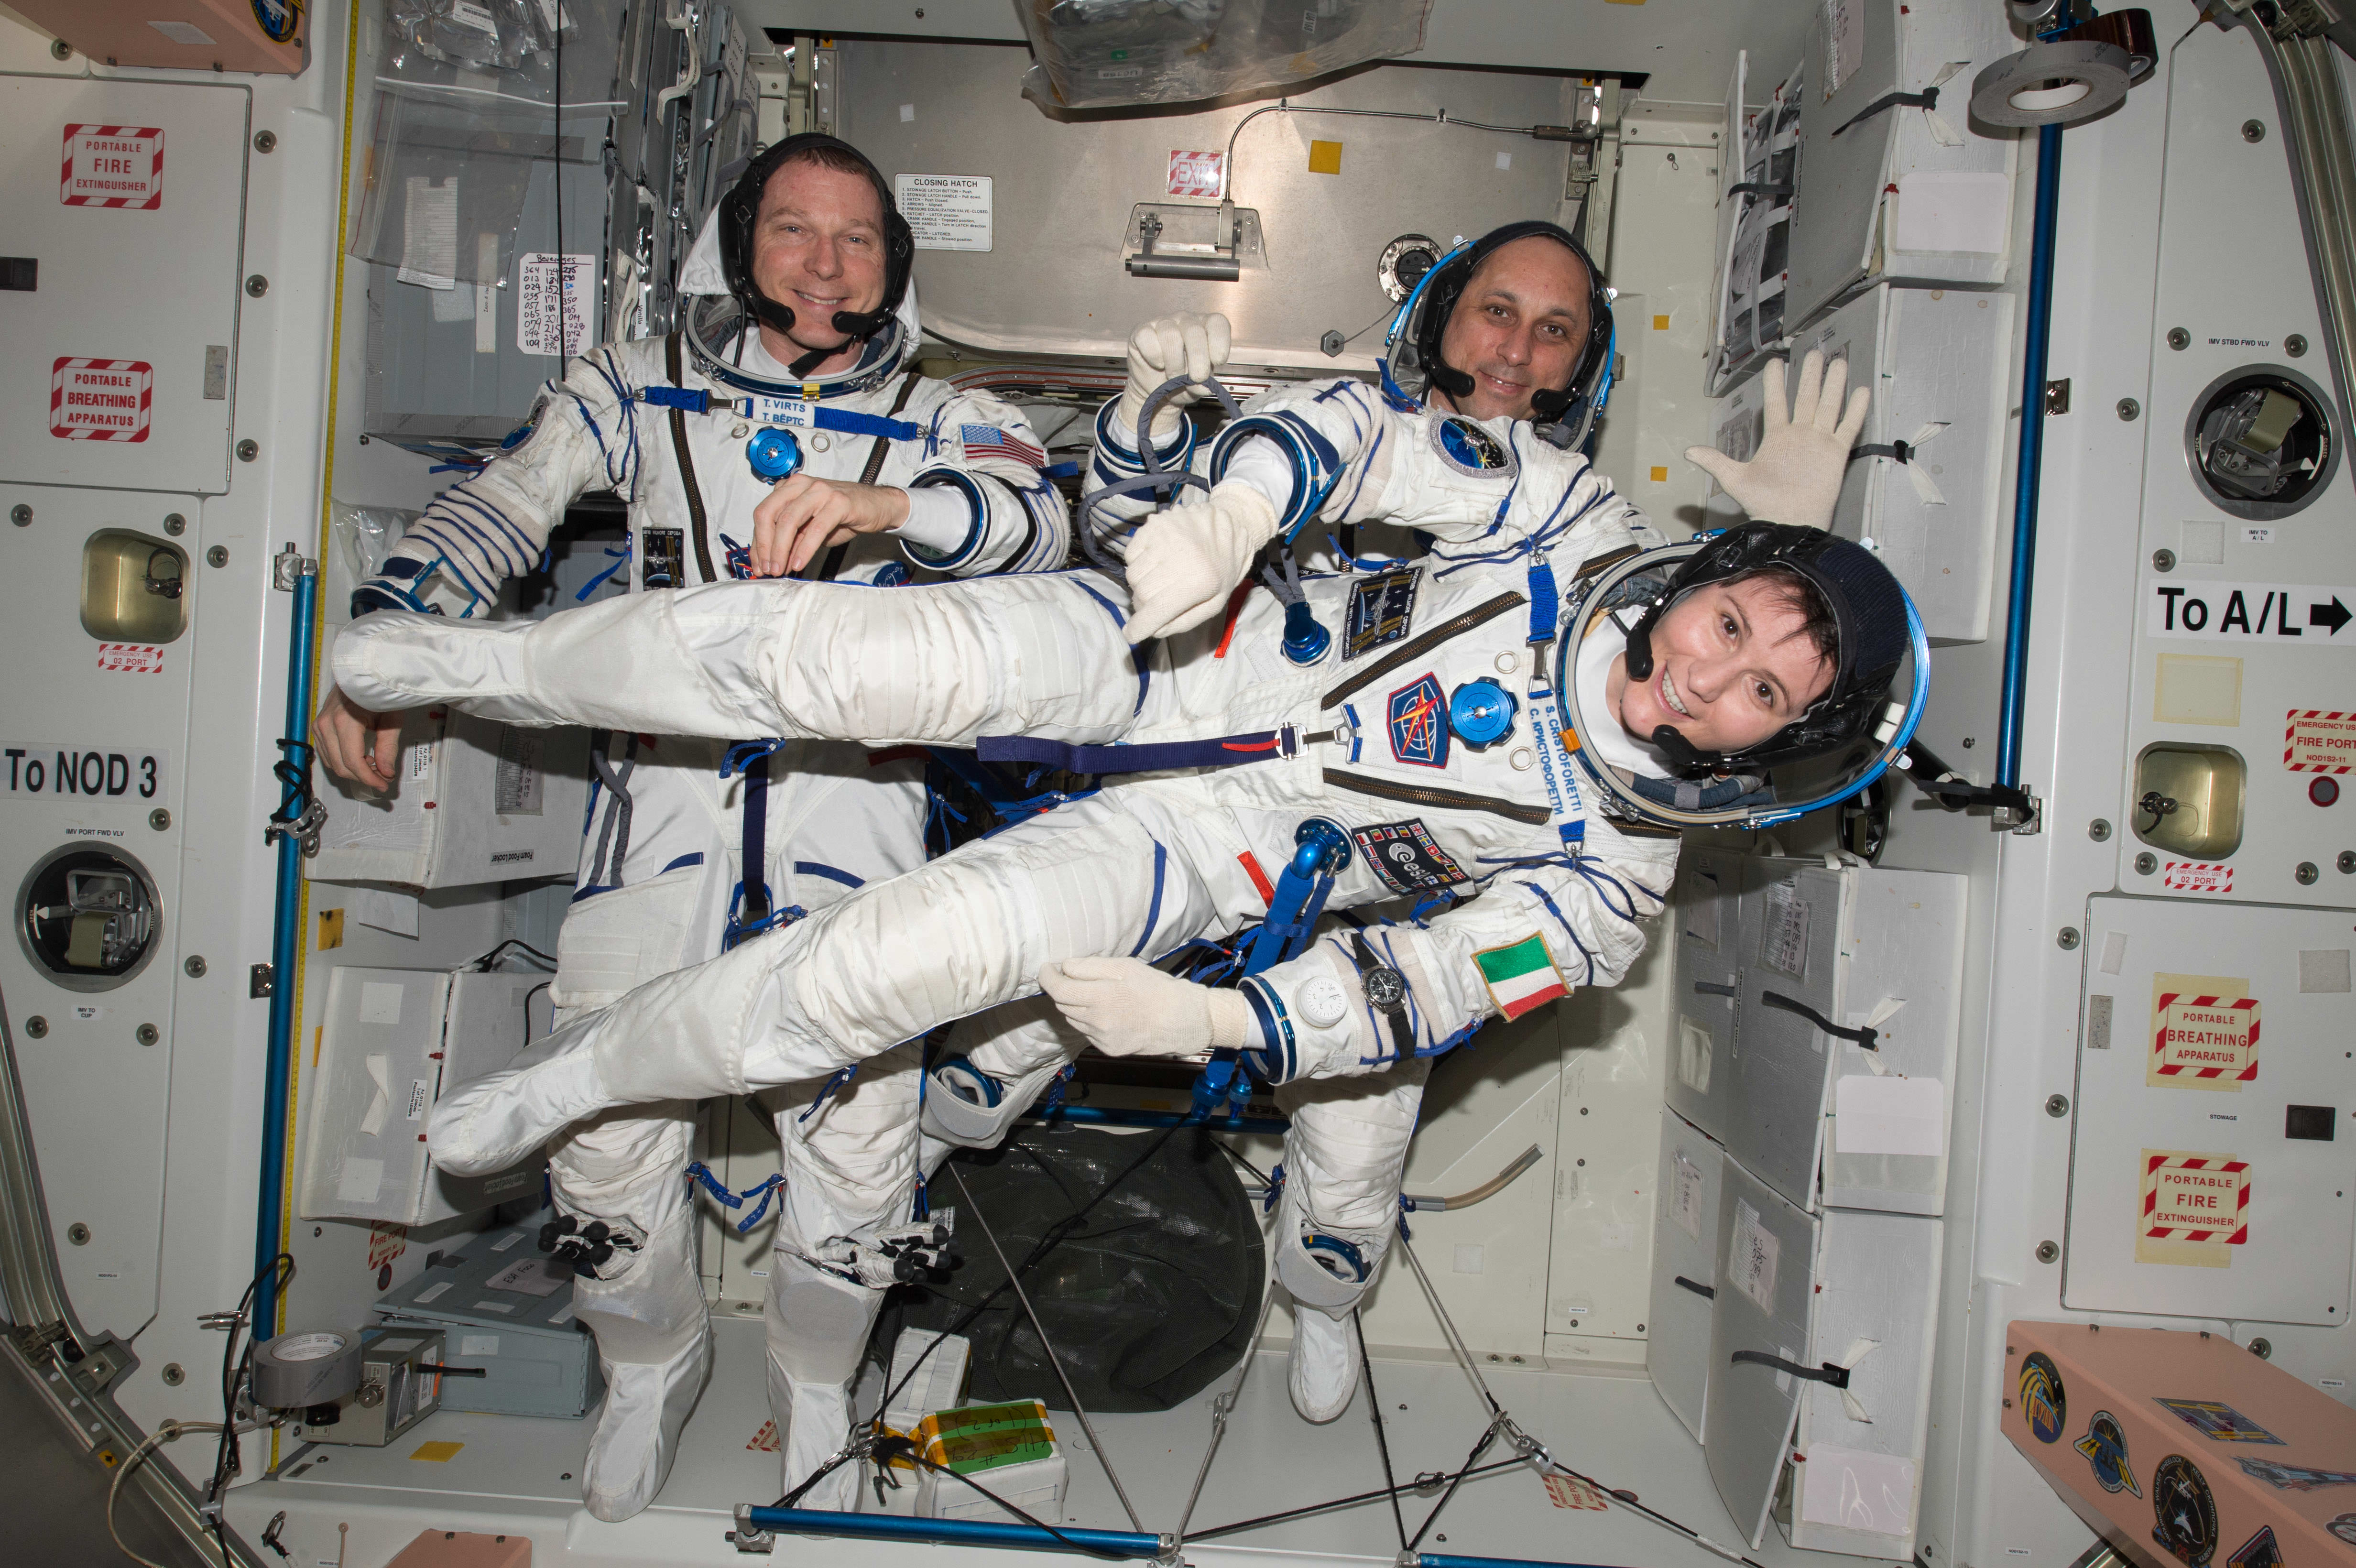 NASA astronaut Terry Virts (left) Commander of Expedition 43 on the International Space Station along with crewmates Russian cosmonaut Anton Shkaplerov (center) and ESA (European Space Agency) astronaut Samantha Cristoforetti on May 6, 2015 perform a checkout of their Russian Soyuz spacesuits in preparation for the journey back to Earth - now set for June 11, 2015.  Credits: NASA